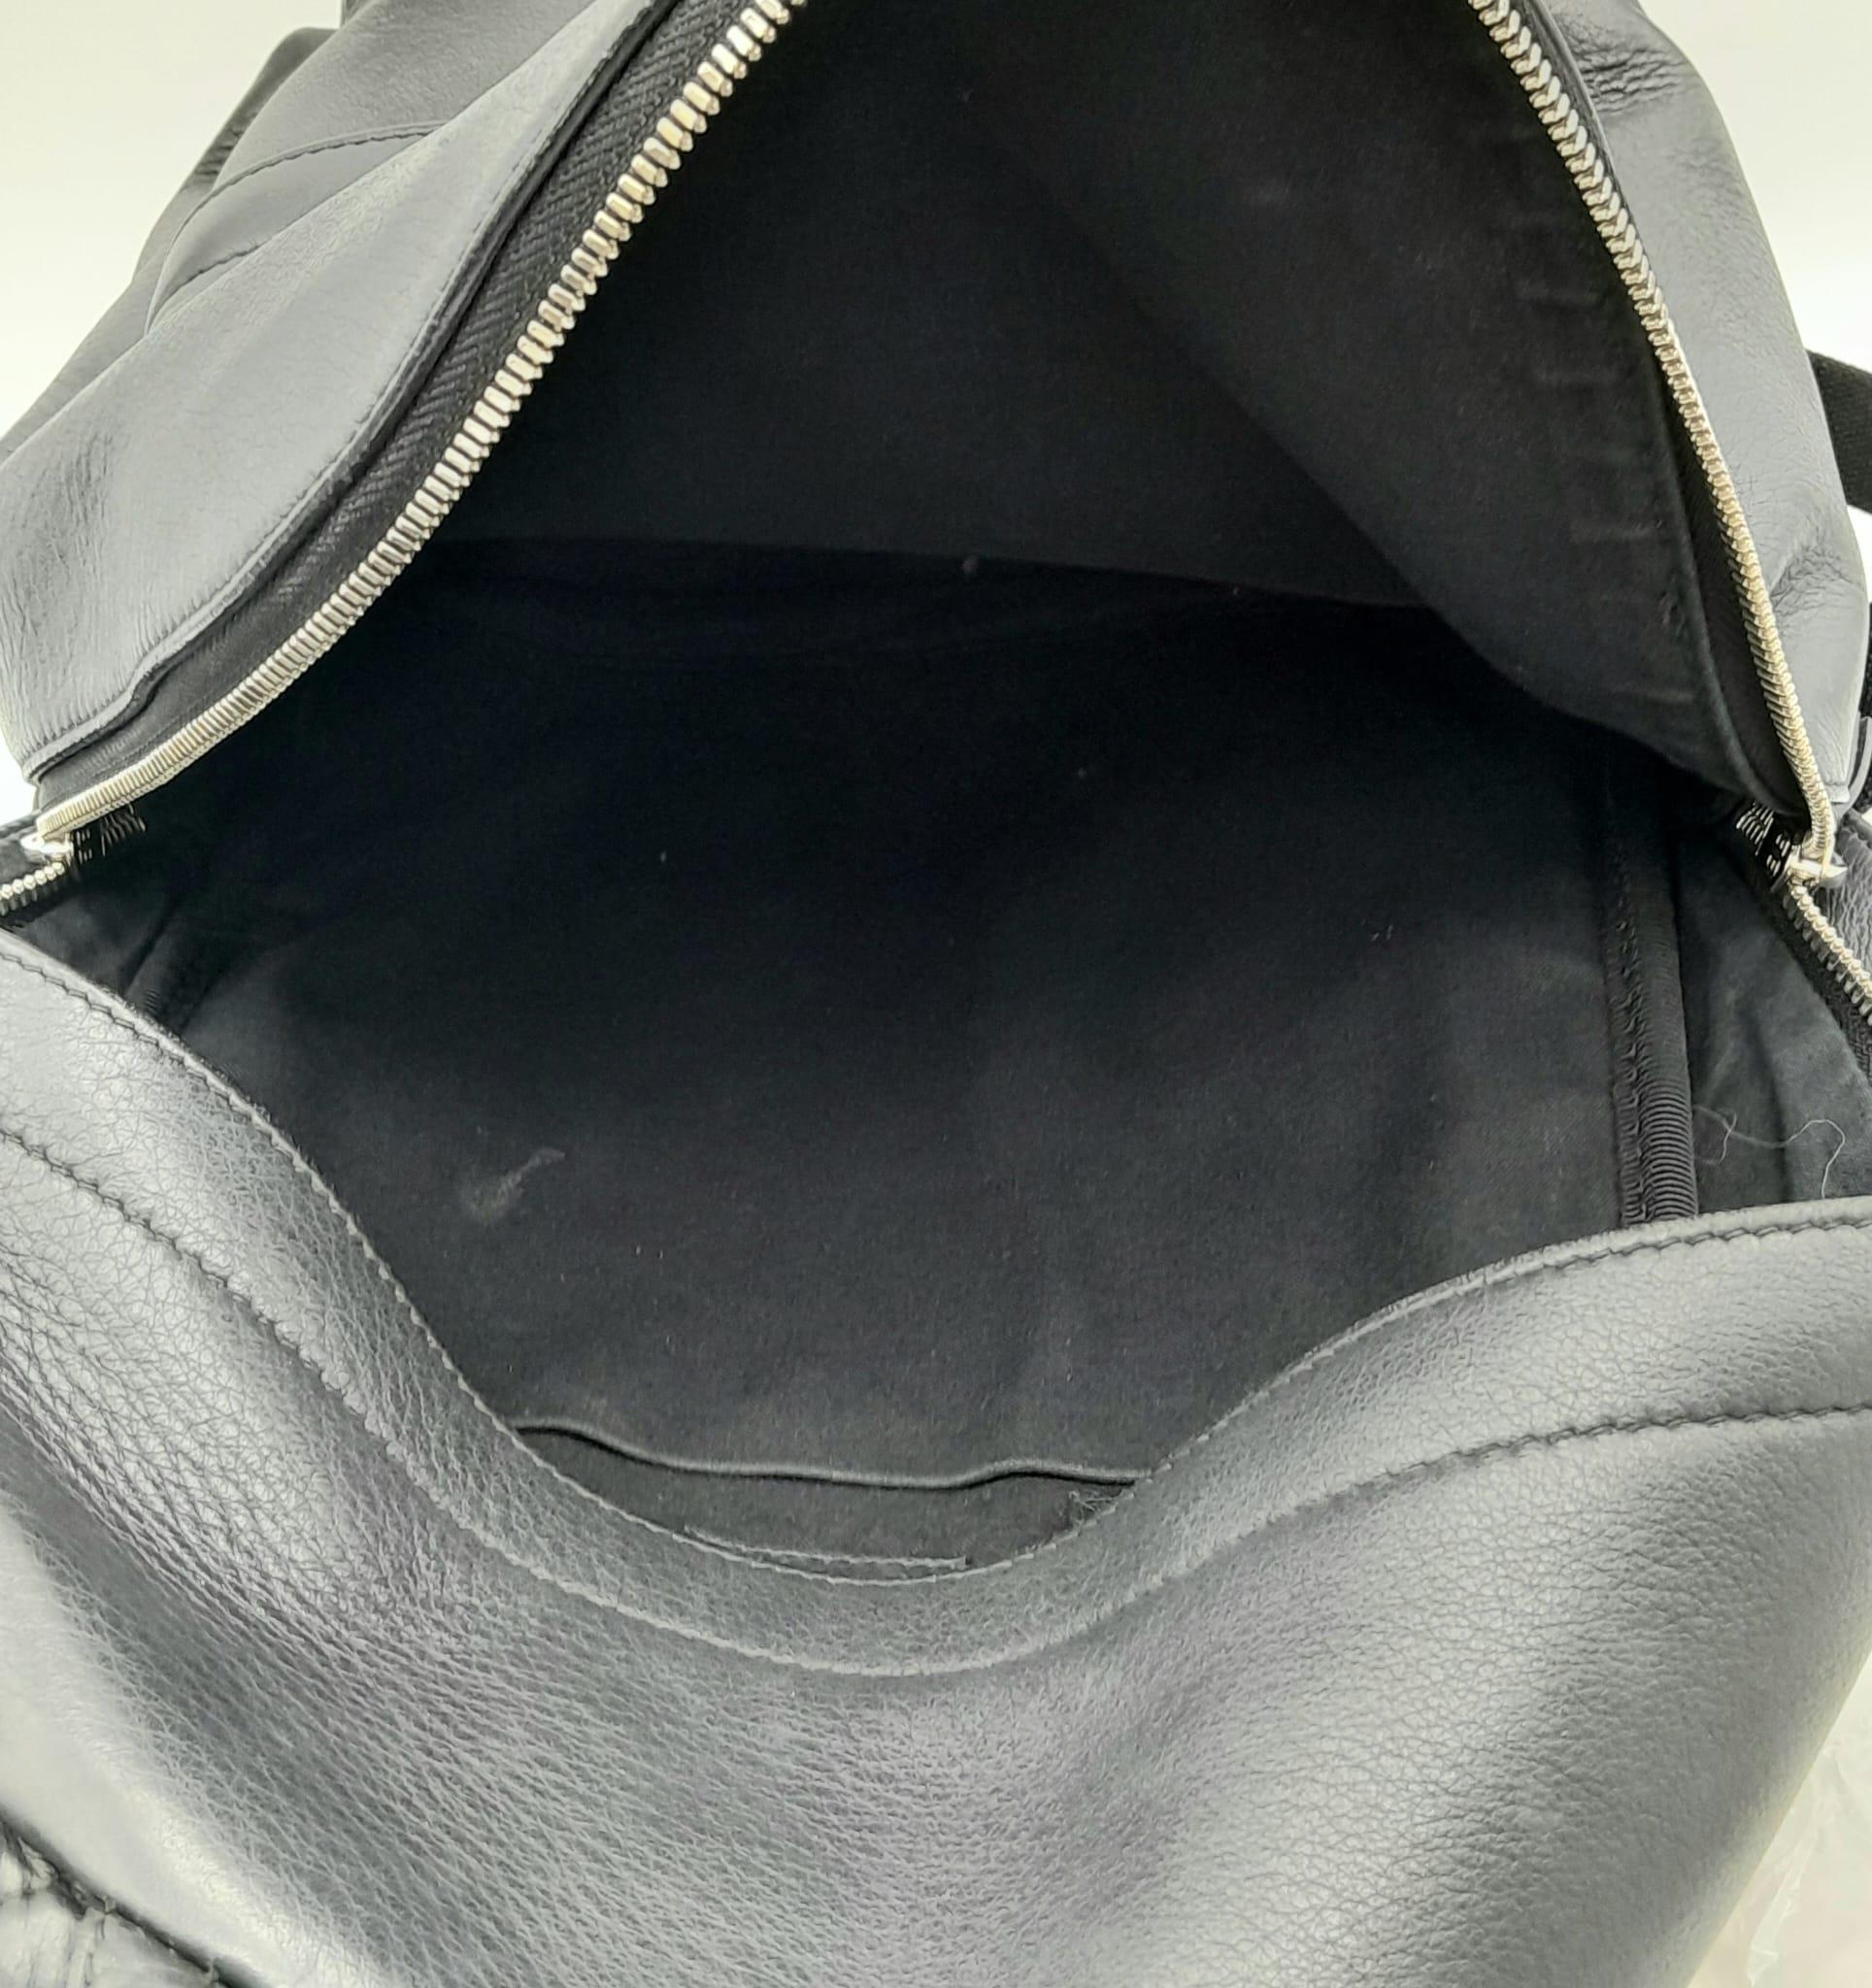 Balenciaga Backpack. Quality leather throughout, adjustable shoulder straps and a handy front zip - Image 6 of 8